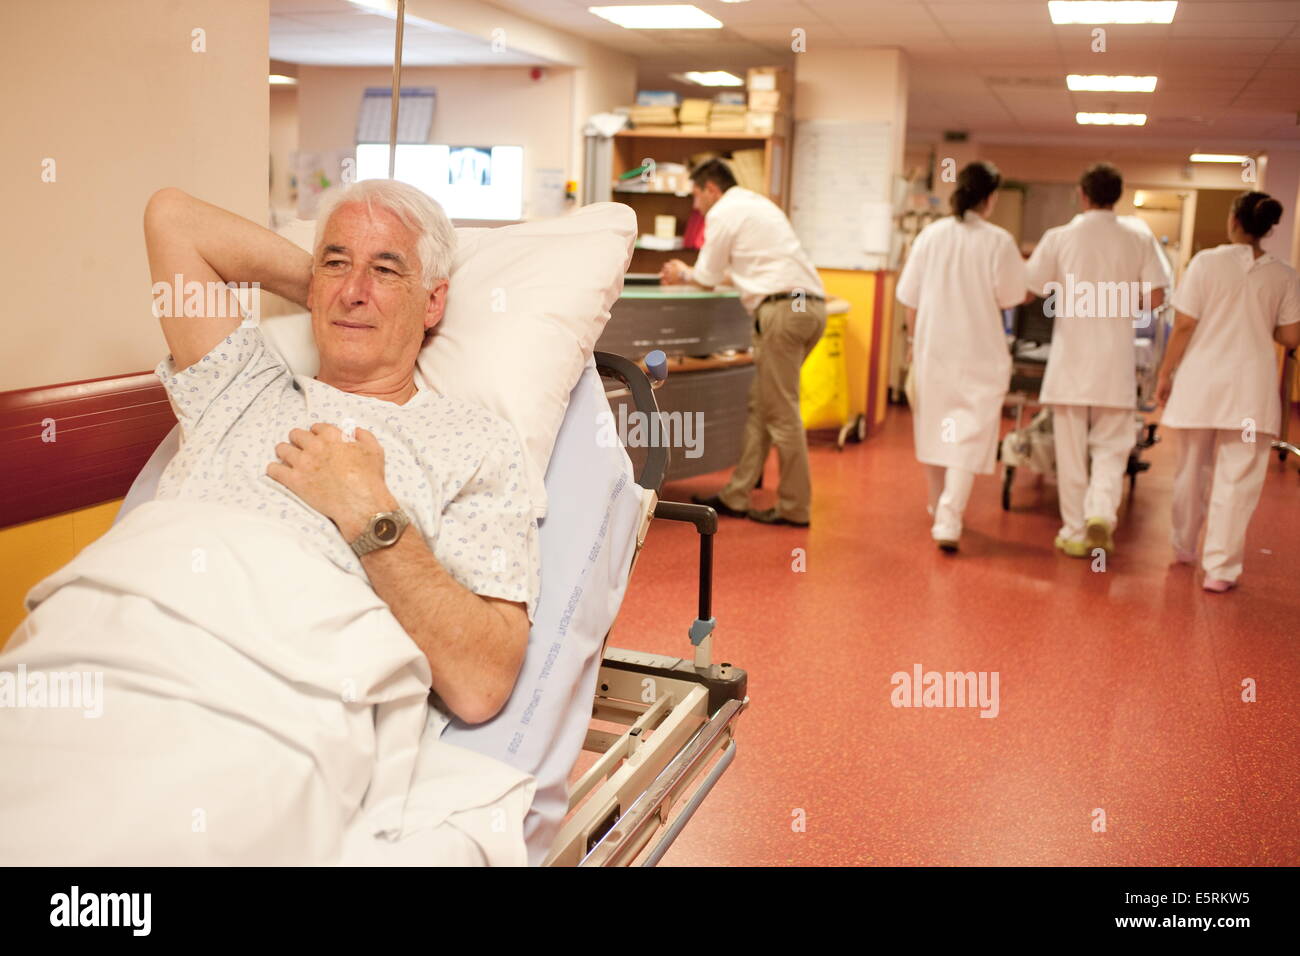 Patient in the examinations and treatments area, Emergency Department, Limoges hospital, France. Stock Photo